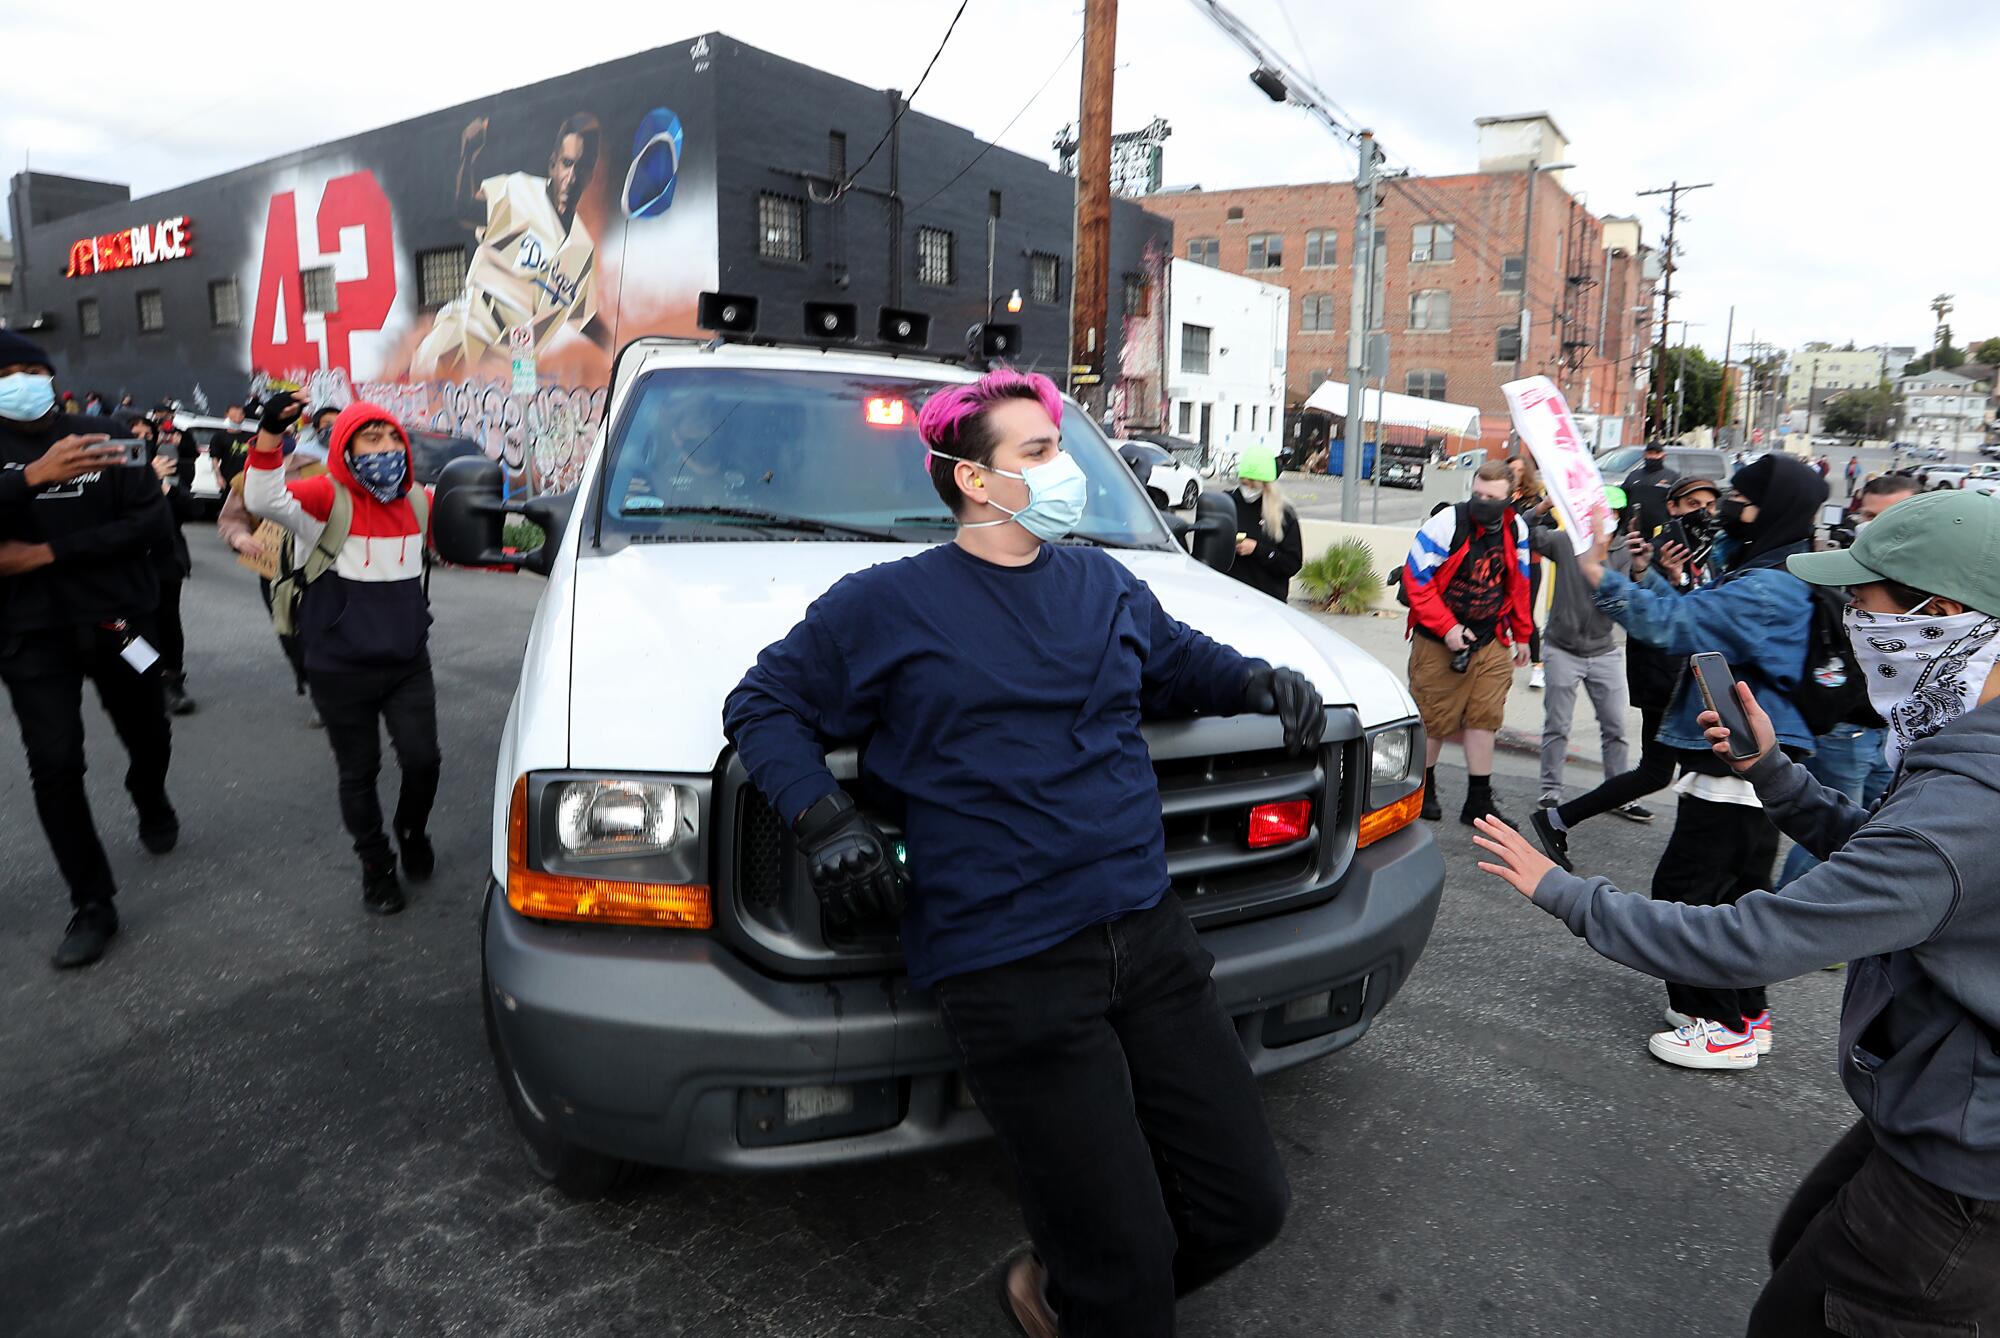 Protesters try to block a police vehicle.